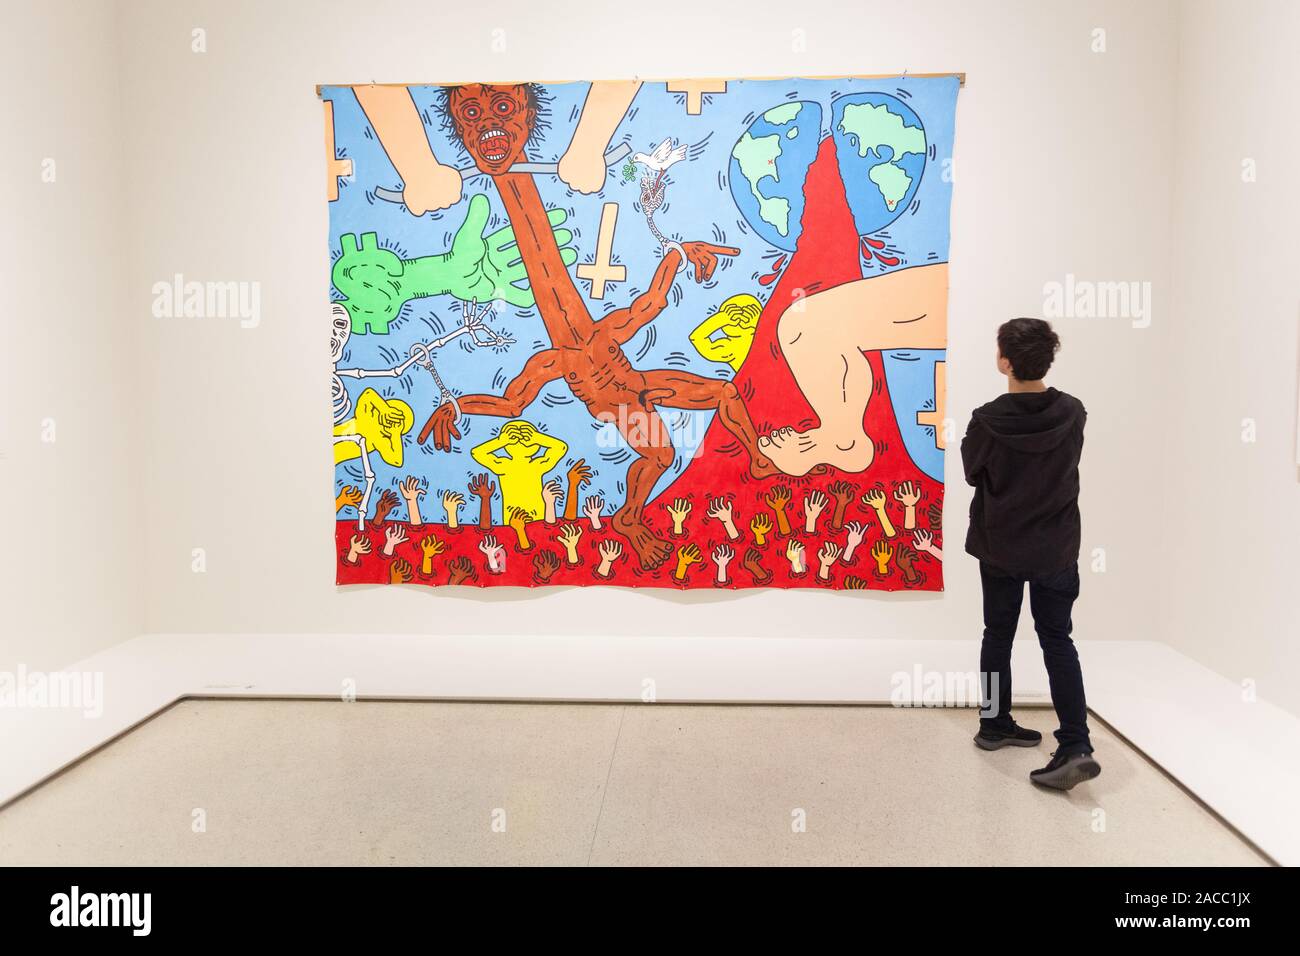 Keith Haring, Michael Stewart – USA for Africa, Guggenheim Museum, Fifth Avenue, New York City, United States of America. Stock Photo